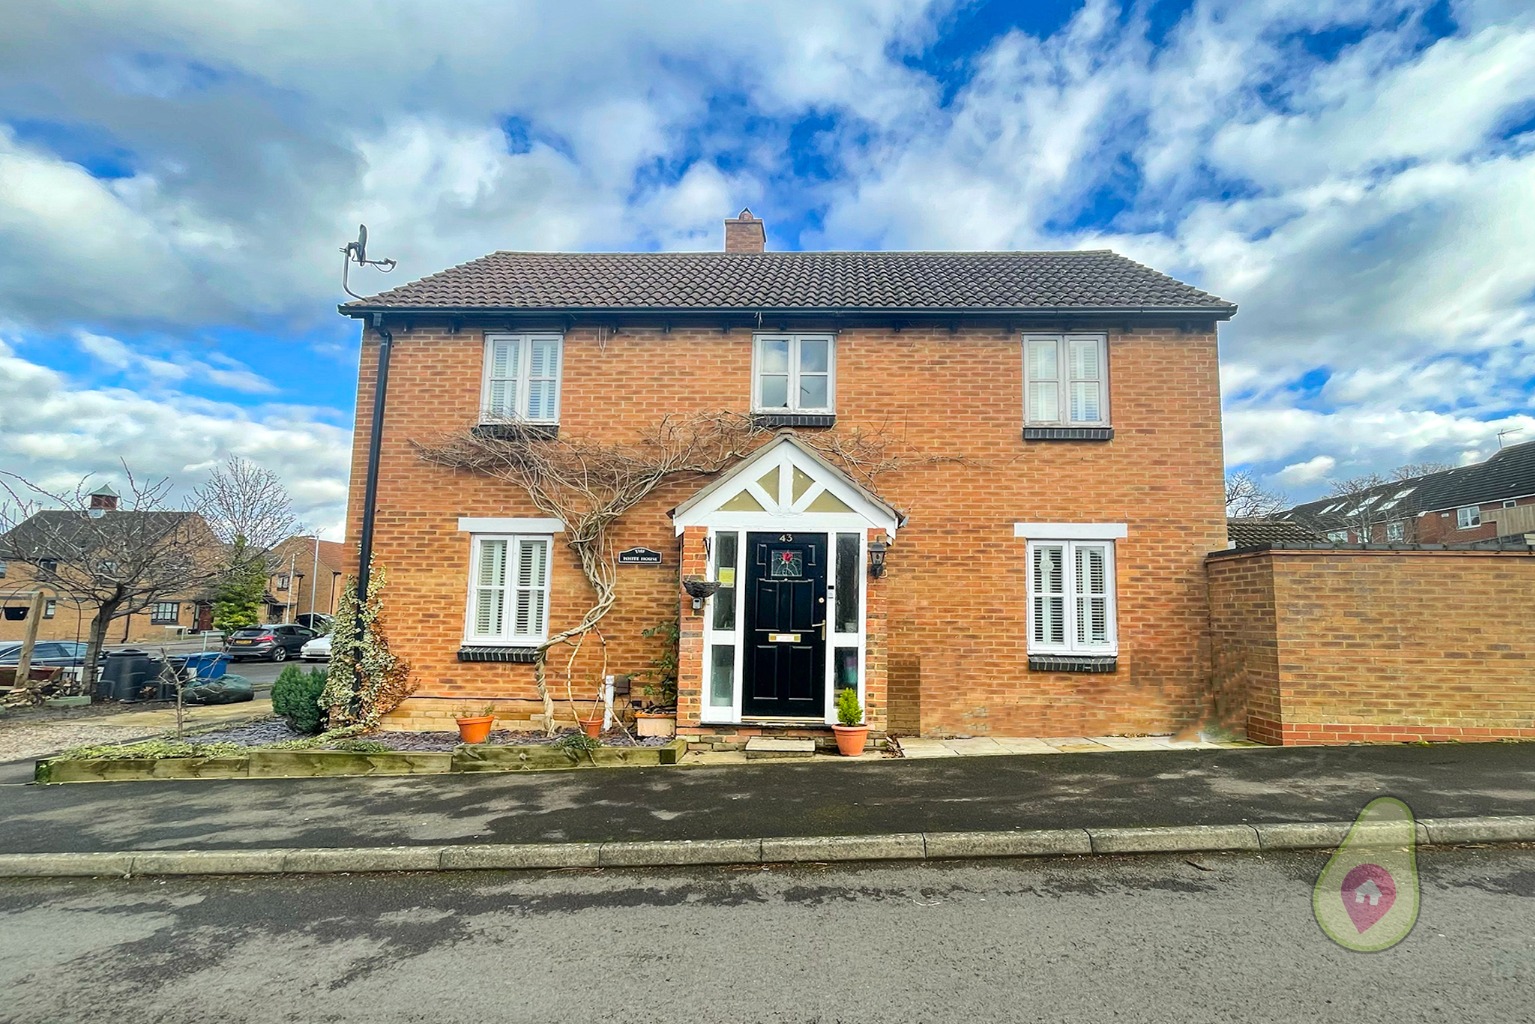 SOLD via OPEN HOUSE. In a quiet spot in the heart of Warfield, this three bedroom link-detached home offers spacious rooms for the conveniences of family life, whilst offering further potential to extend subject to planning permissions.